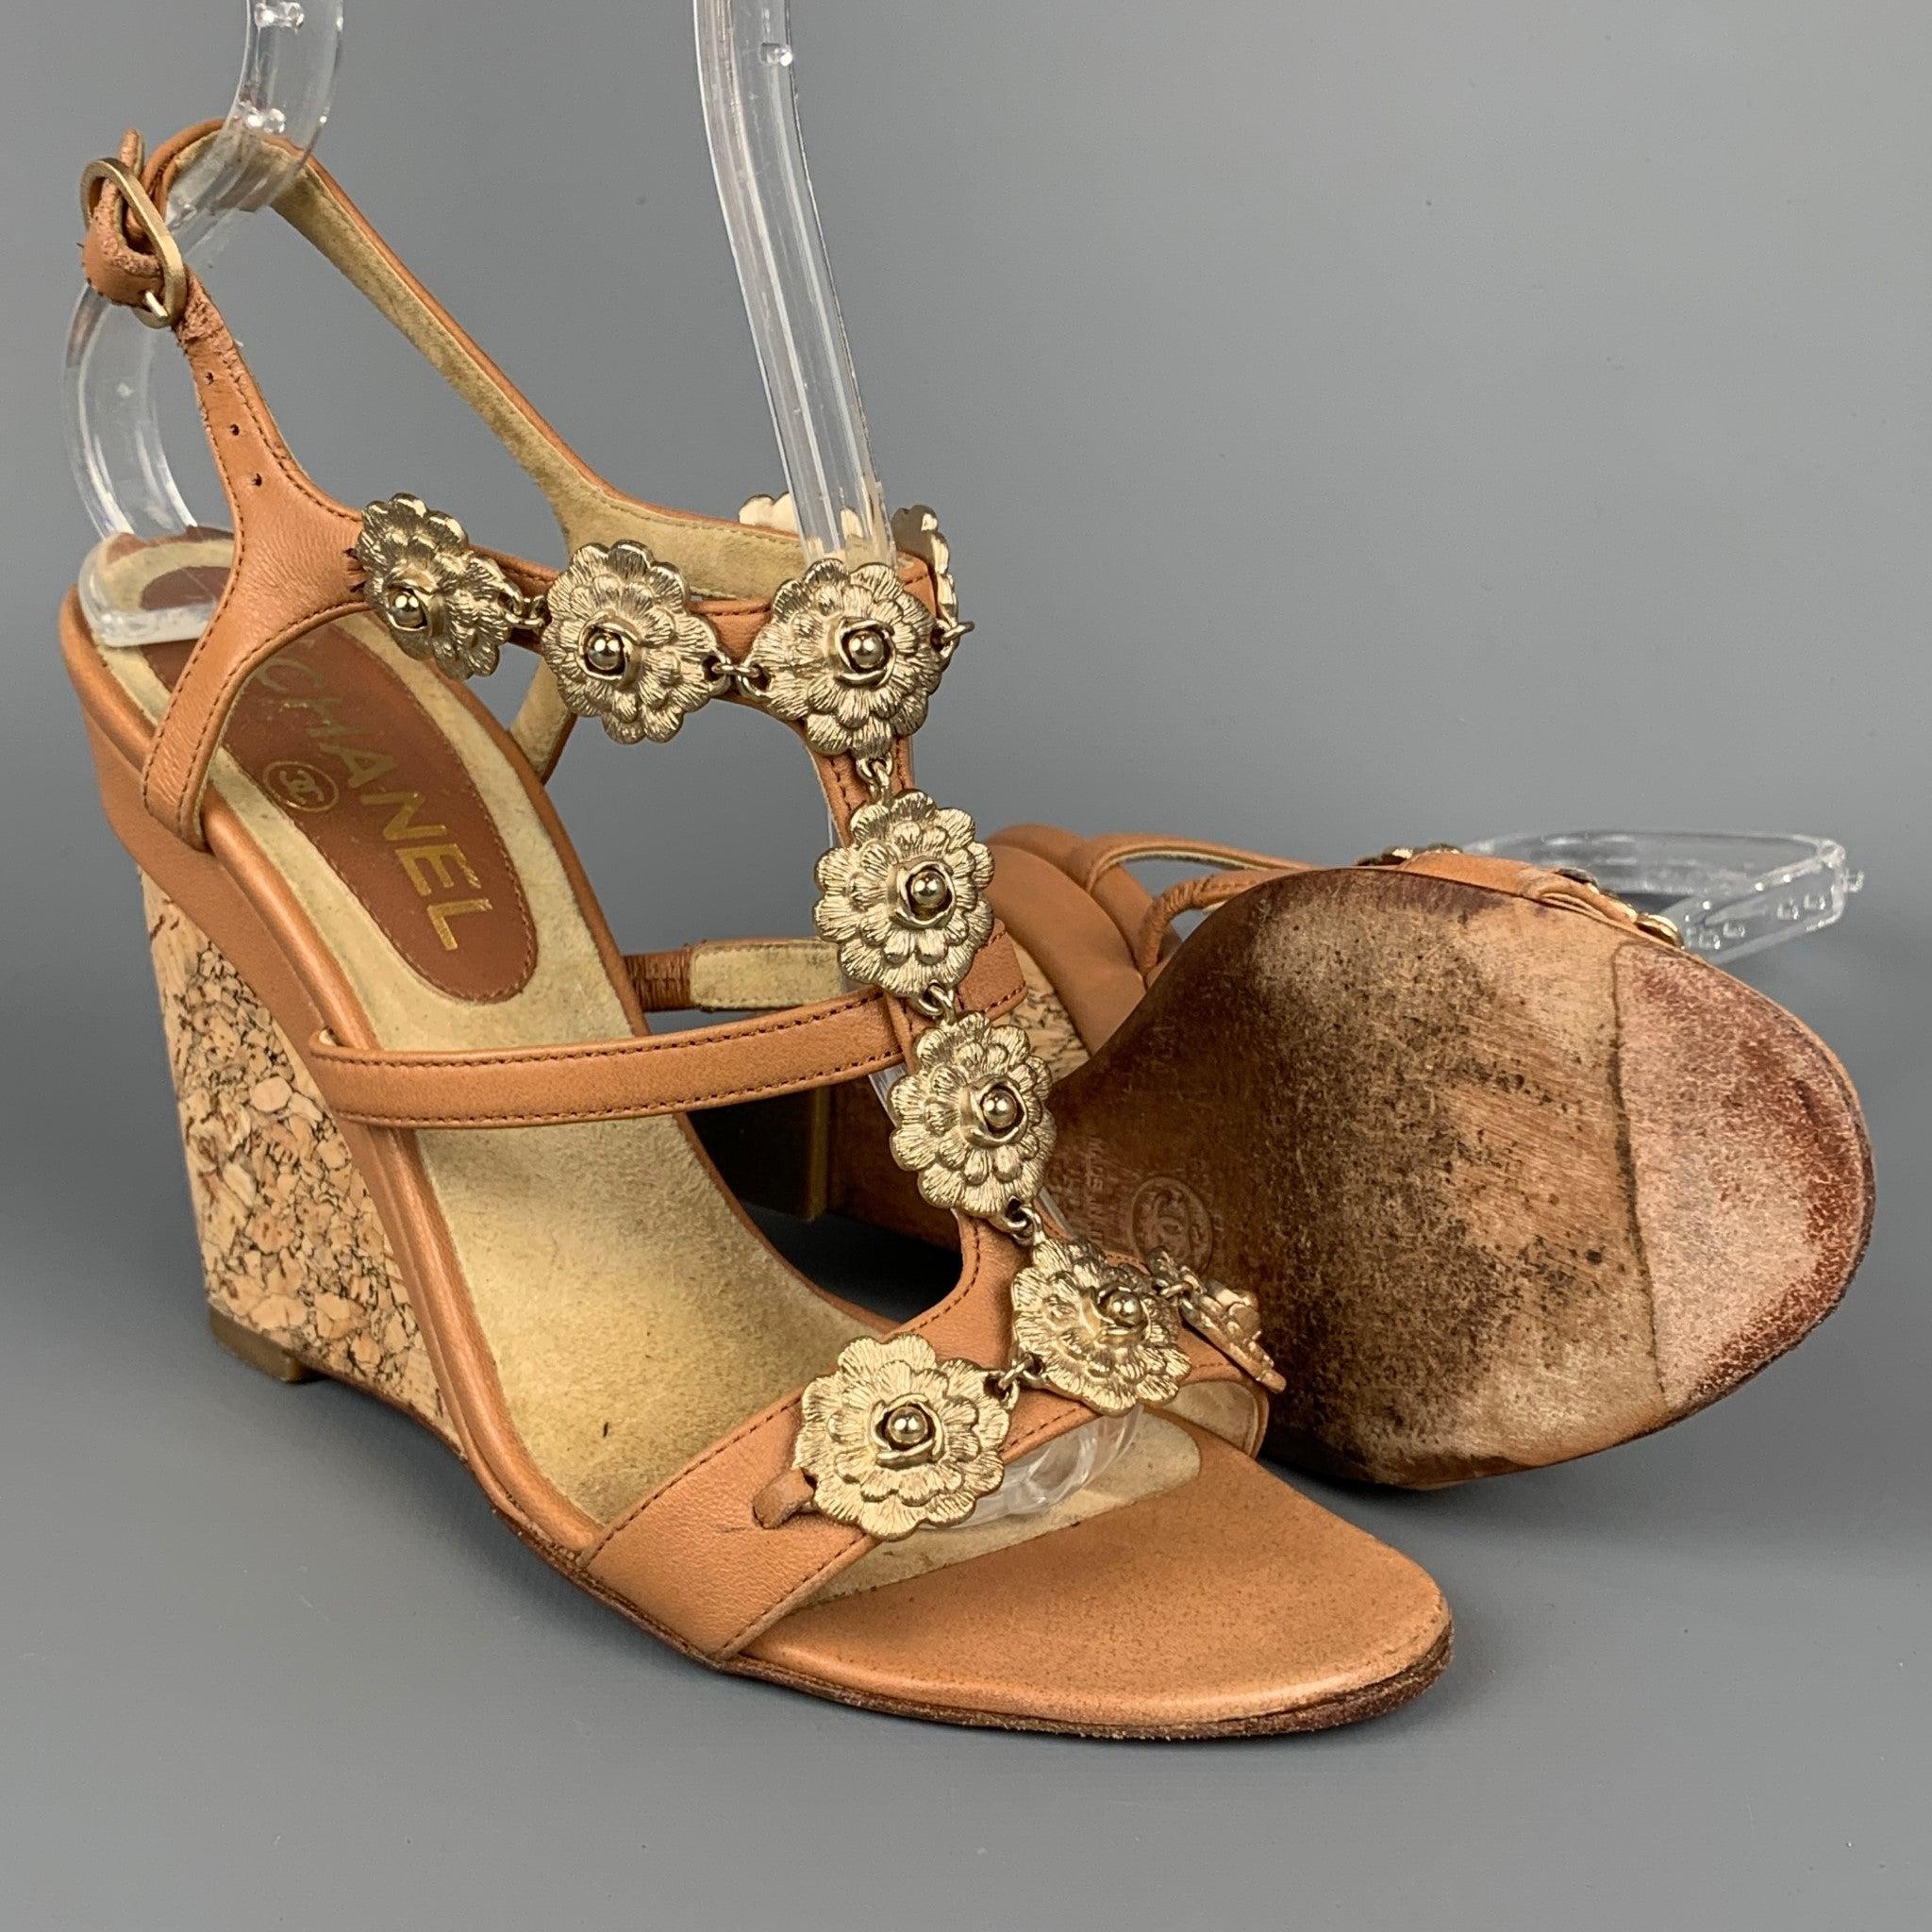 CHANEL Camelia Size 6.5 Tan & Gold Leather T-strap Cork Wedge Sandals In Good Condition For Sale In San Francisco, CA